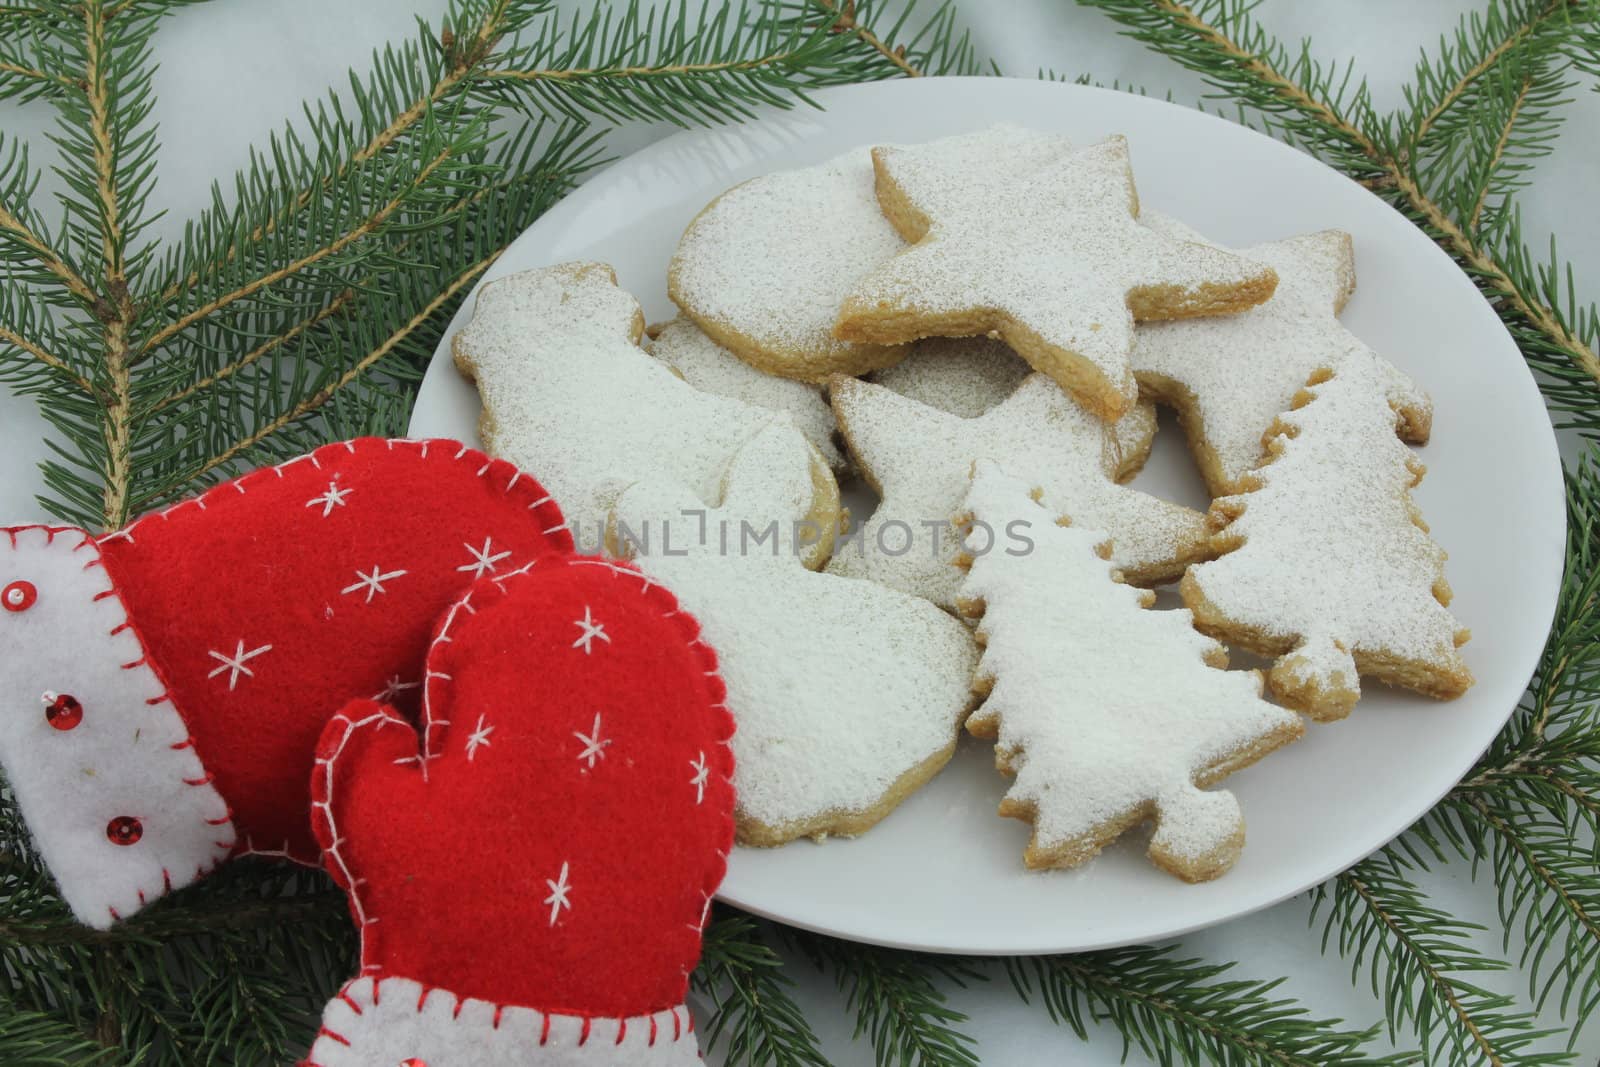 Christmas cookies and sewn holiday mitten decorations, on white background
